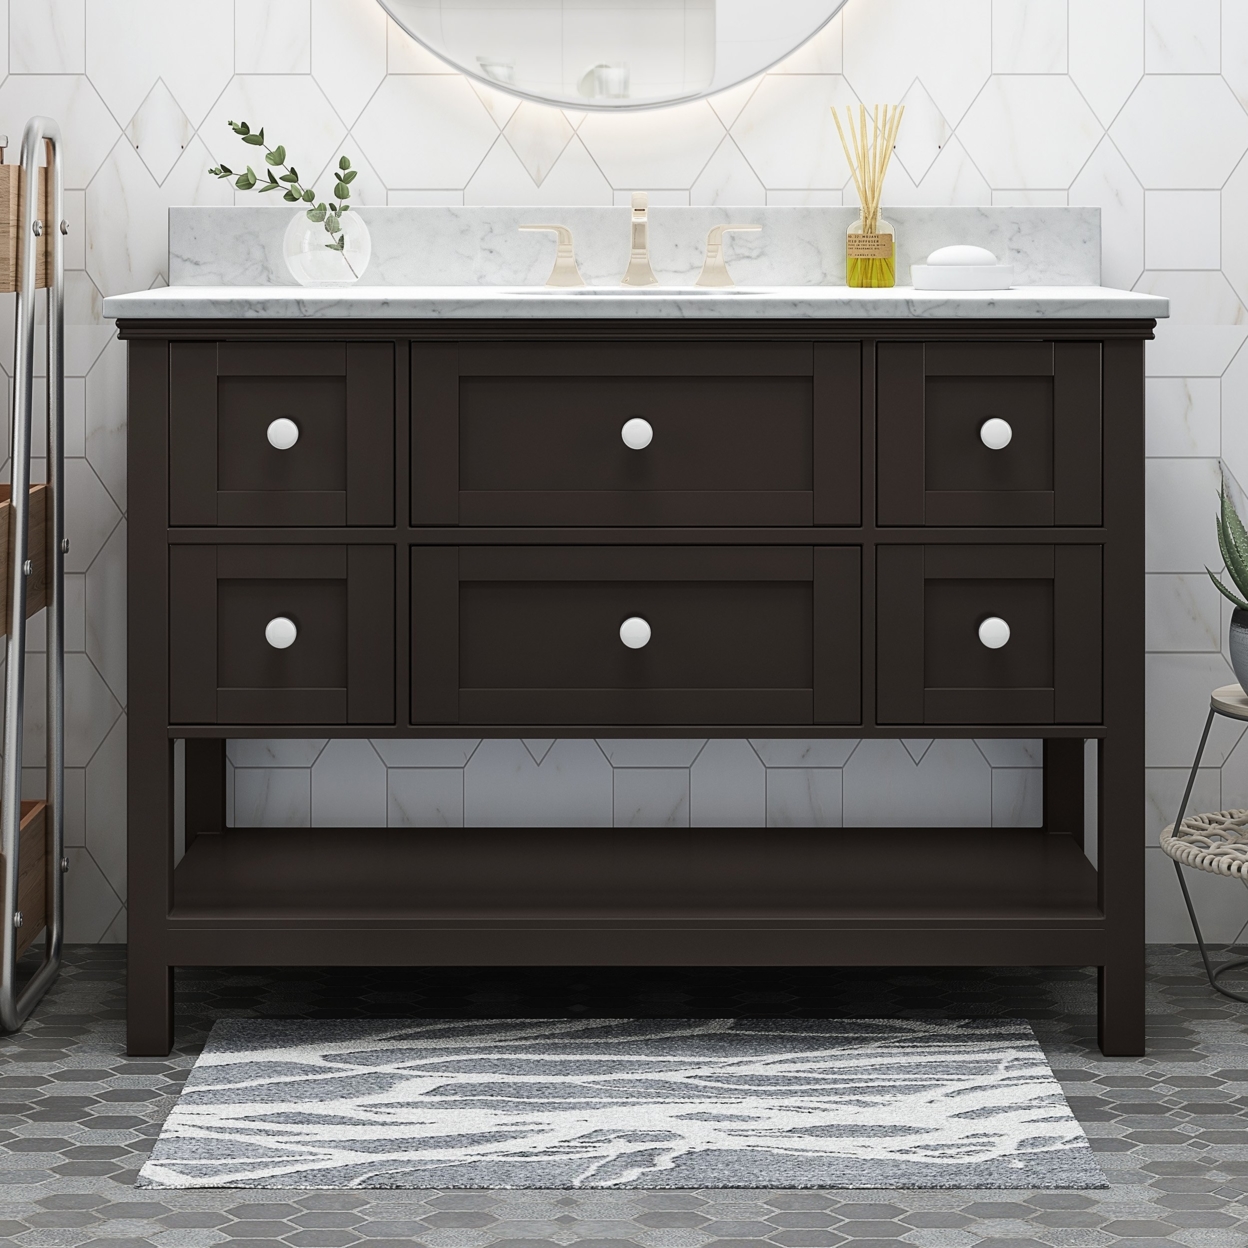 Douvier Contemporary 48 Wood Single Sink Bathroom Vanity With Marble Counter Top With Carrara White Marble - Brown